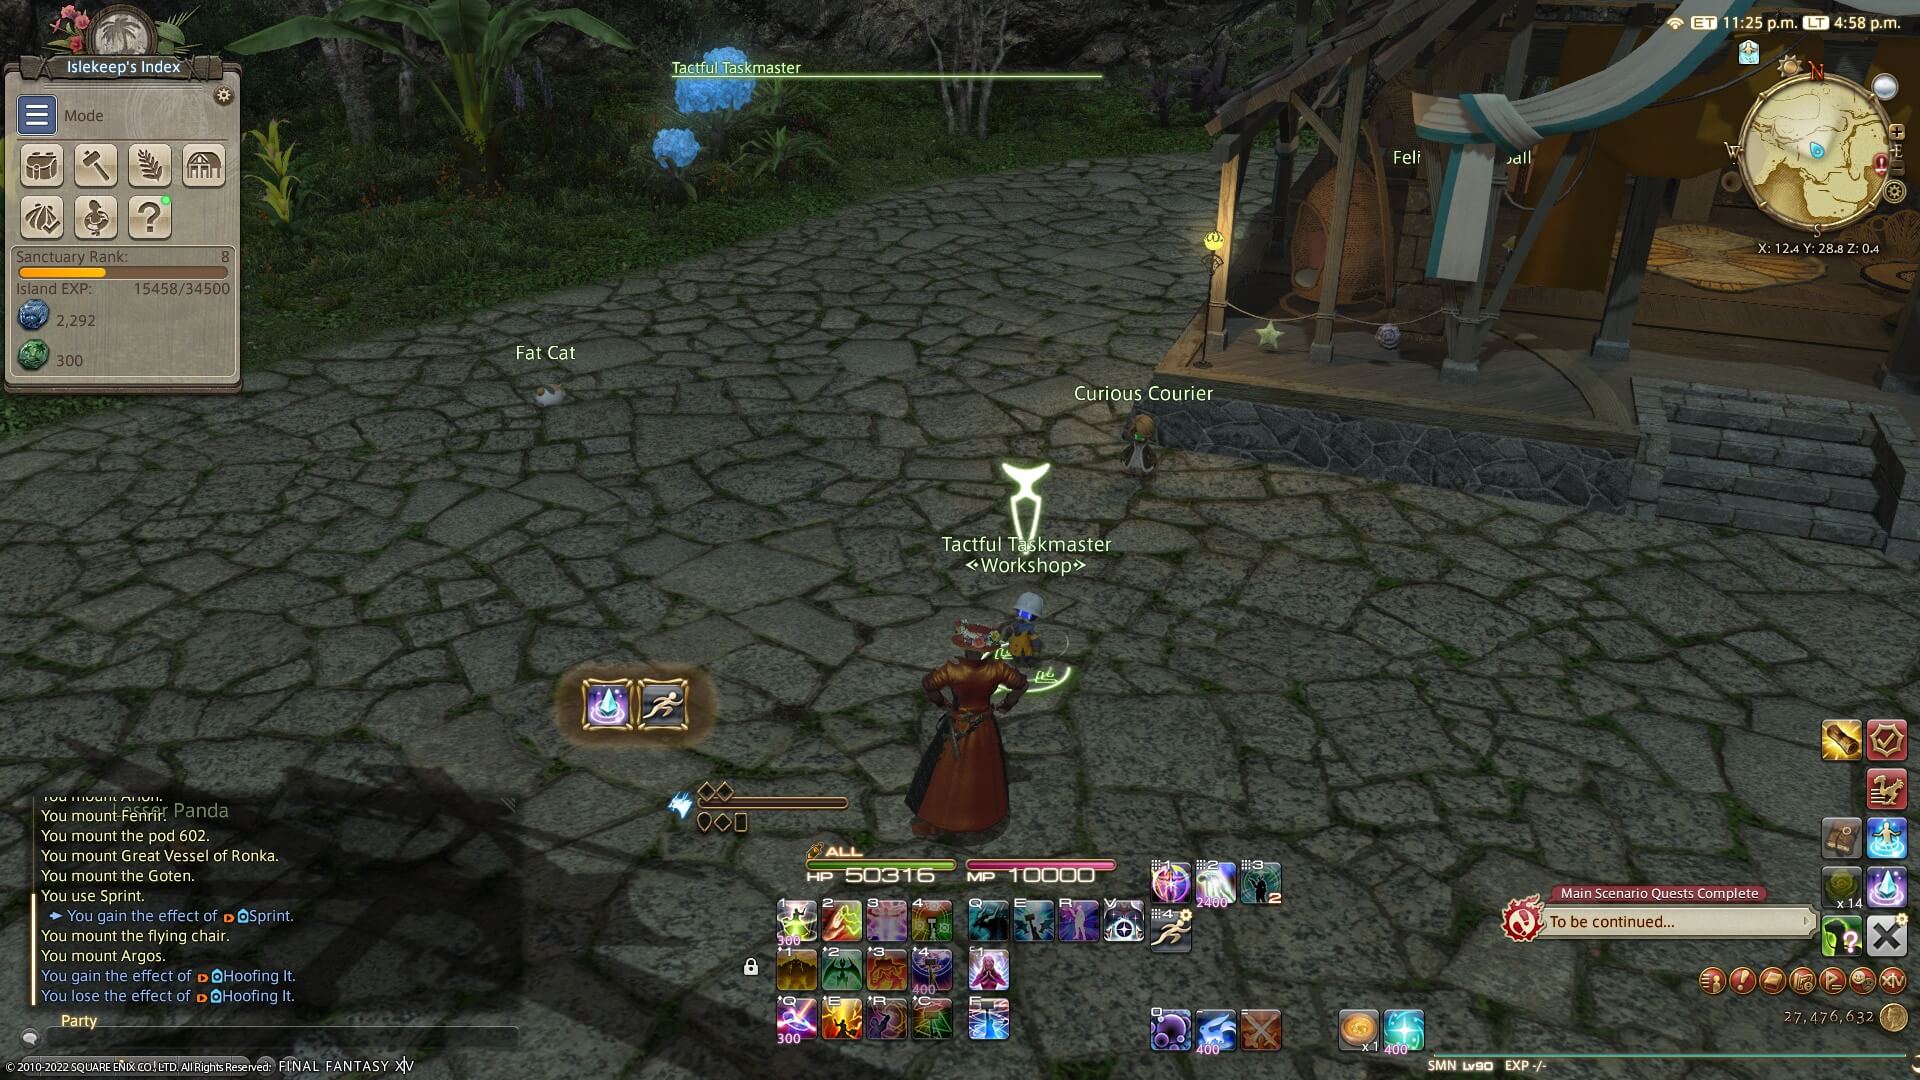 Final Fantasy XIV player character looking at the Tactful Taskmaster NPC in the Island Sanctuary.